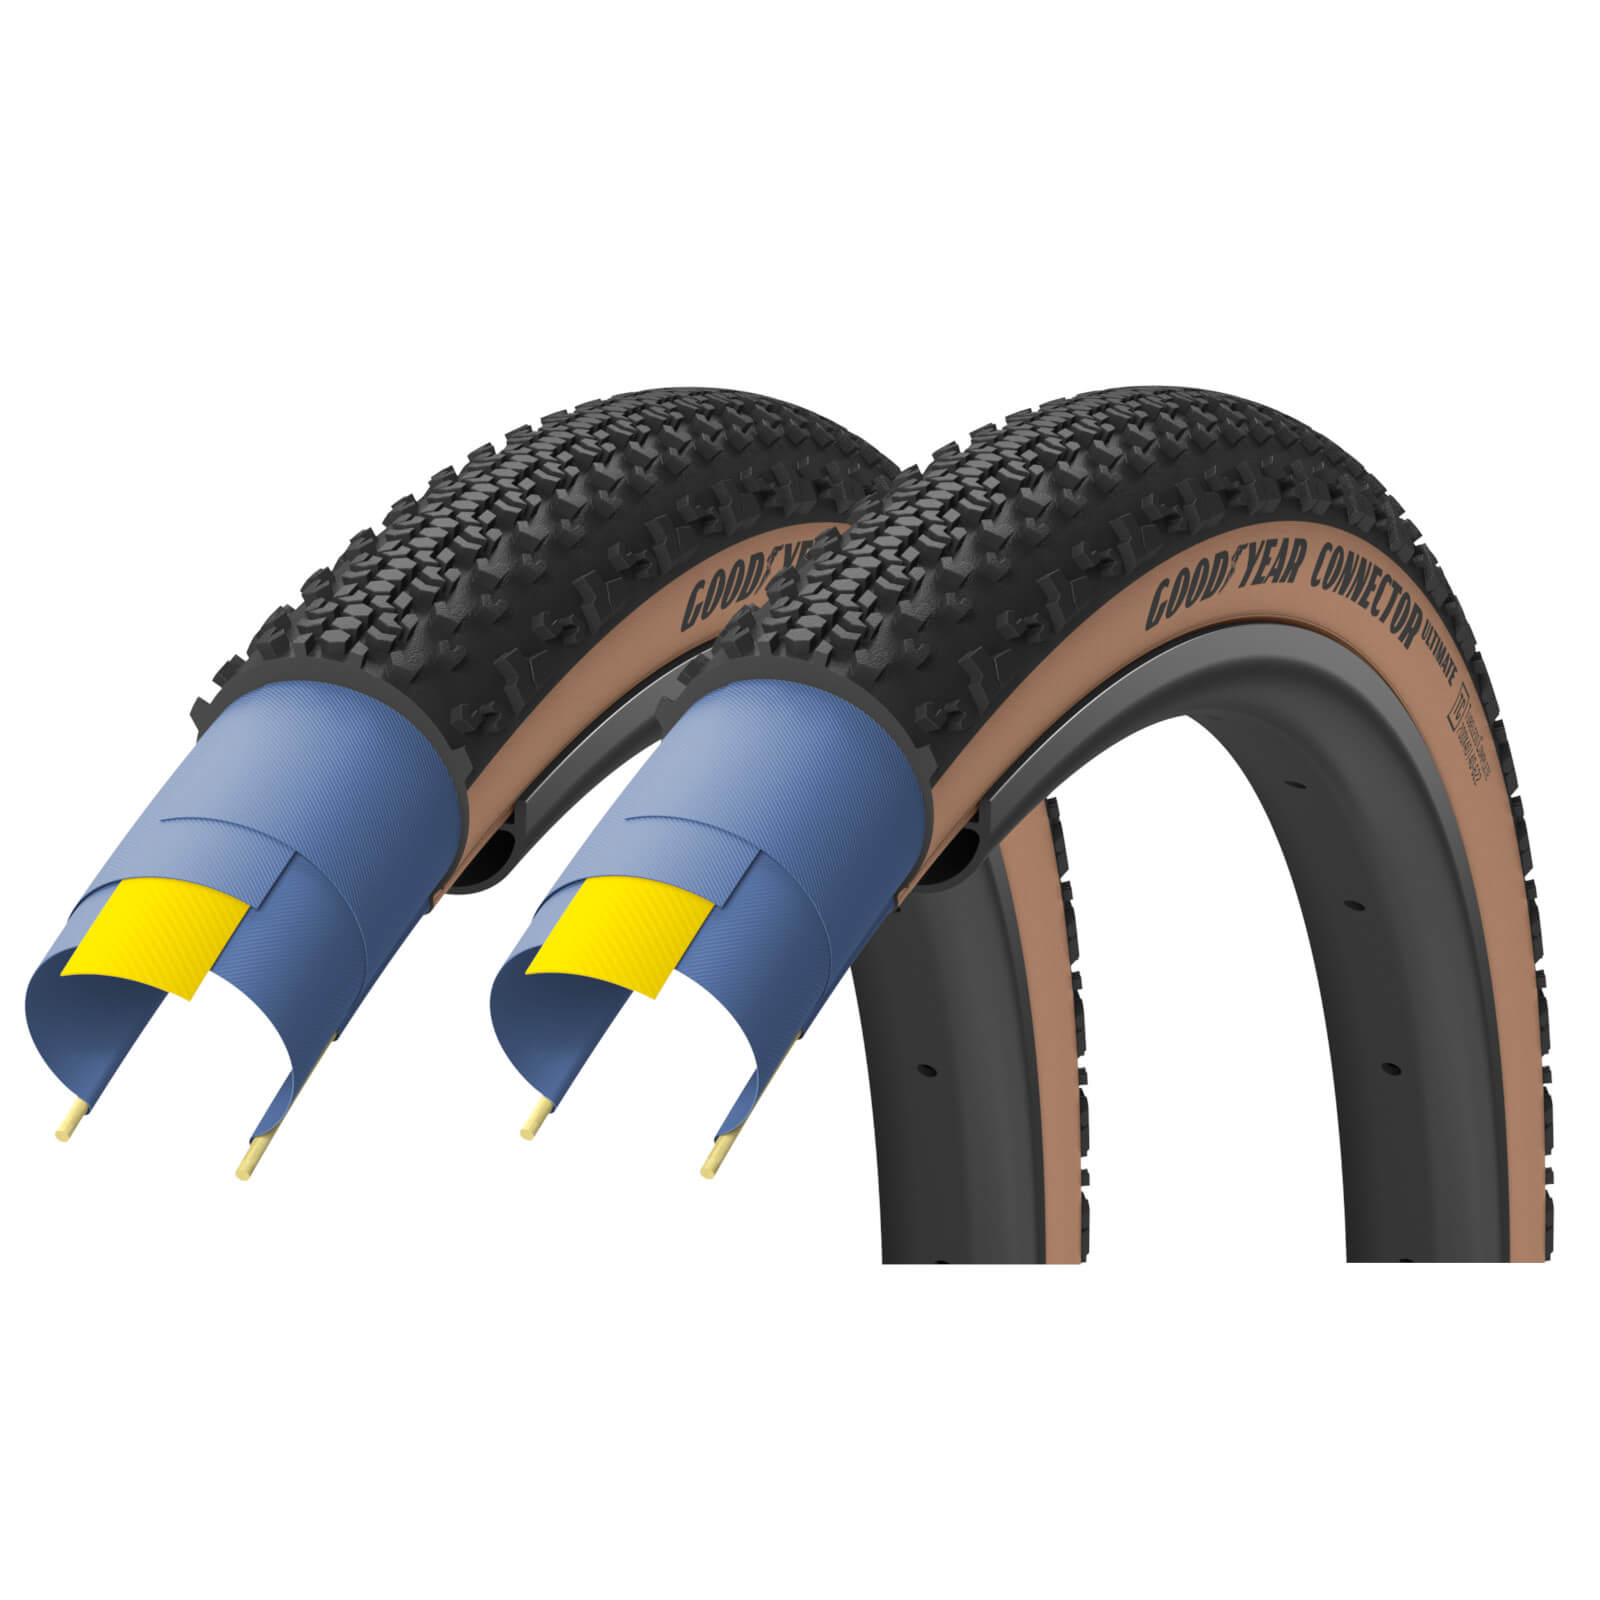 Goodyear Connector Ultimate A/T Tubeless Gravel Tyre Twin Pack - 700c x 40mm - Tan